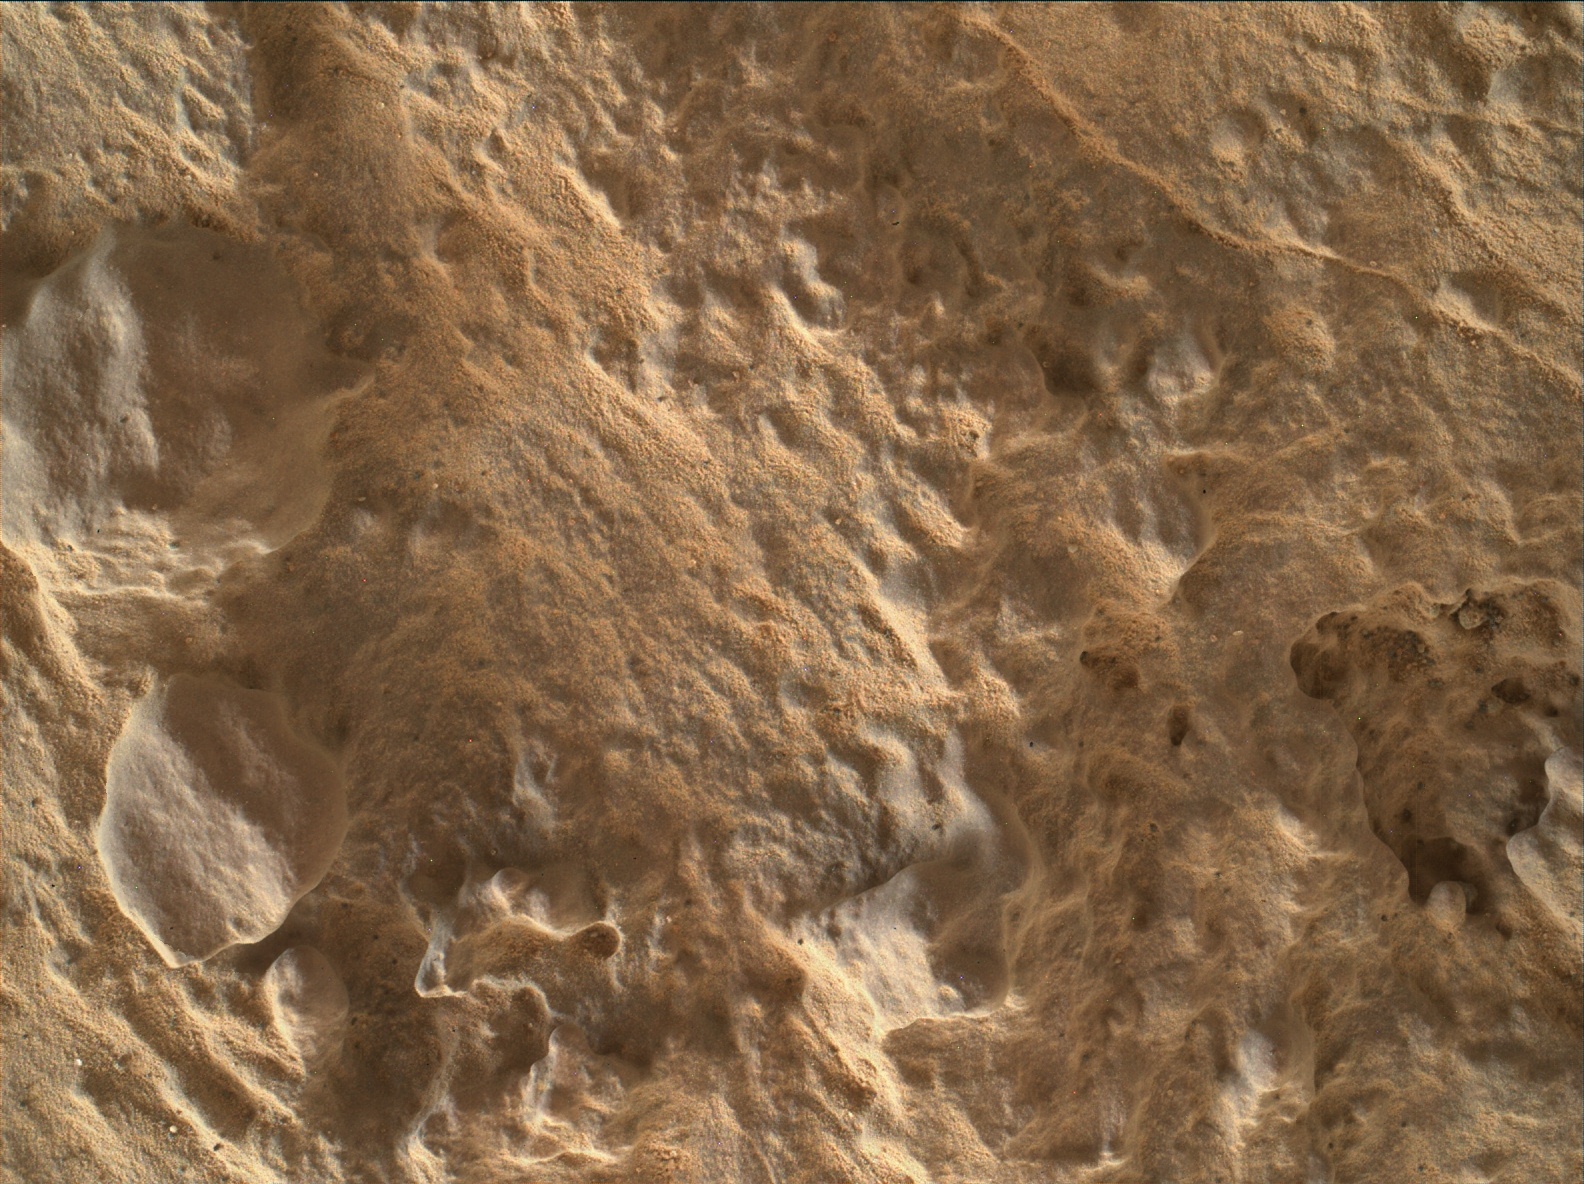 Nasa's Mars rover Curiosity acquired this image using its Mars Hand Lens Imager (MAHLI) on Sol 1484